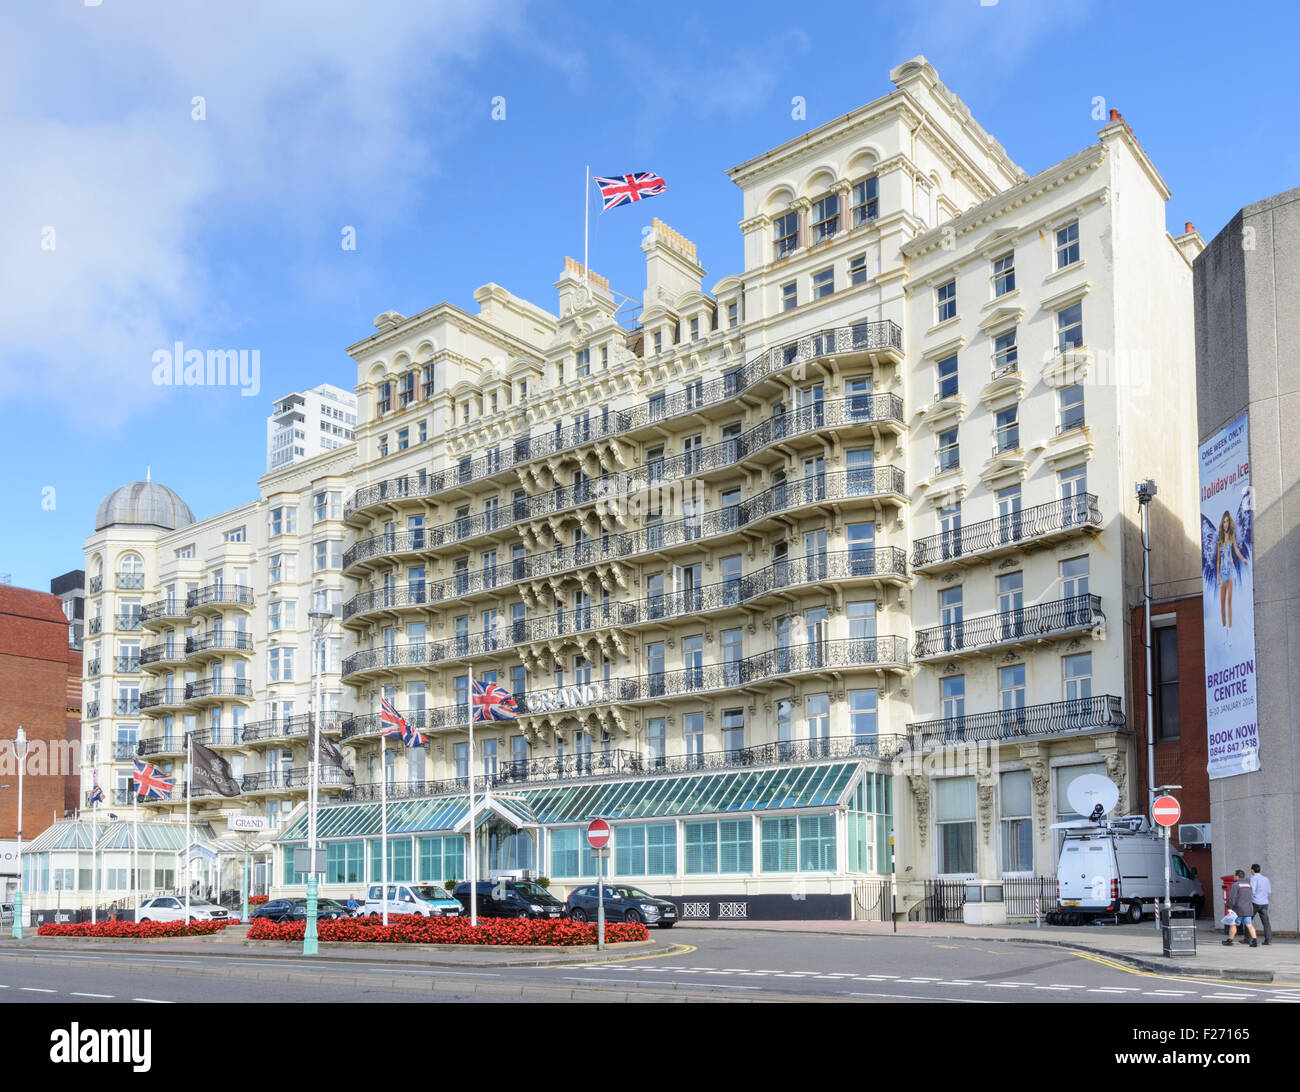 The Grand Hotel near the seafront in Brighton, East Sussex, England, UK. Stock Photo